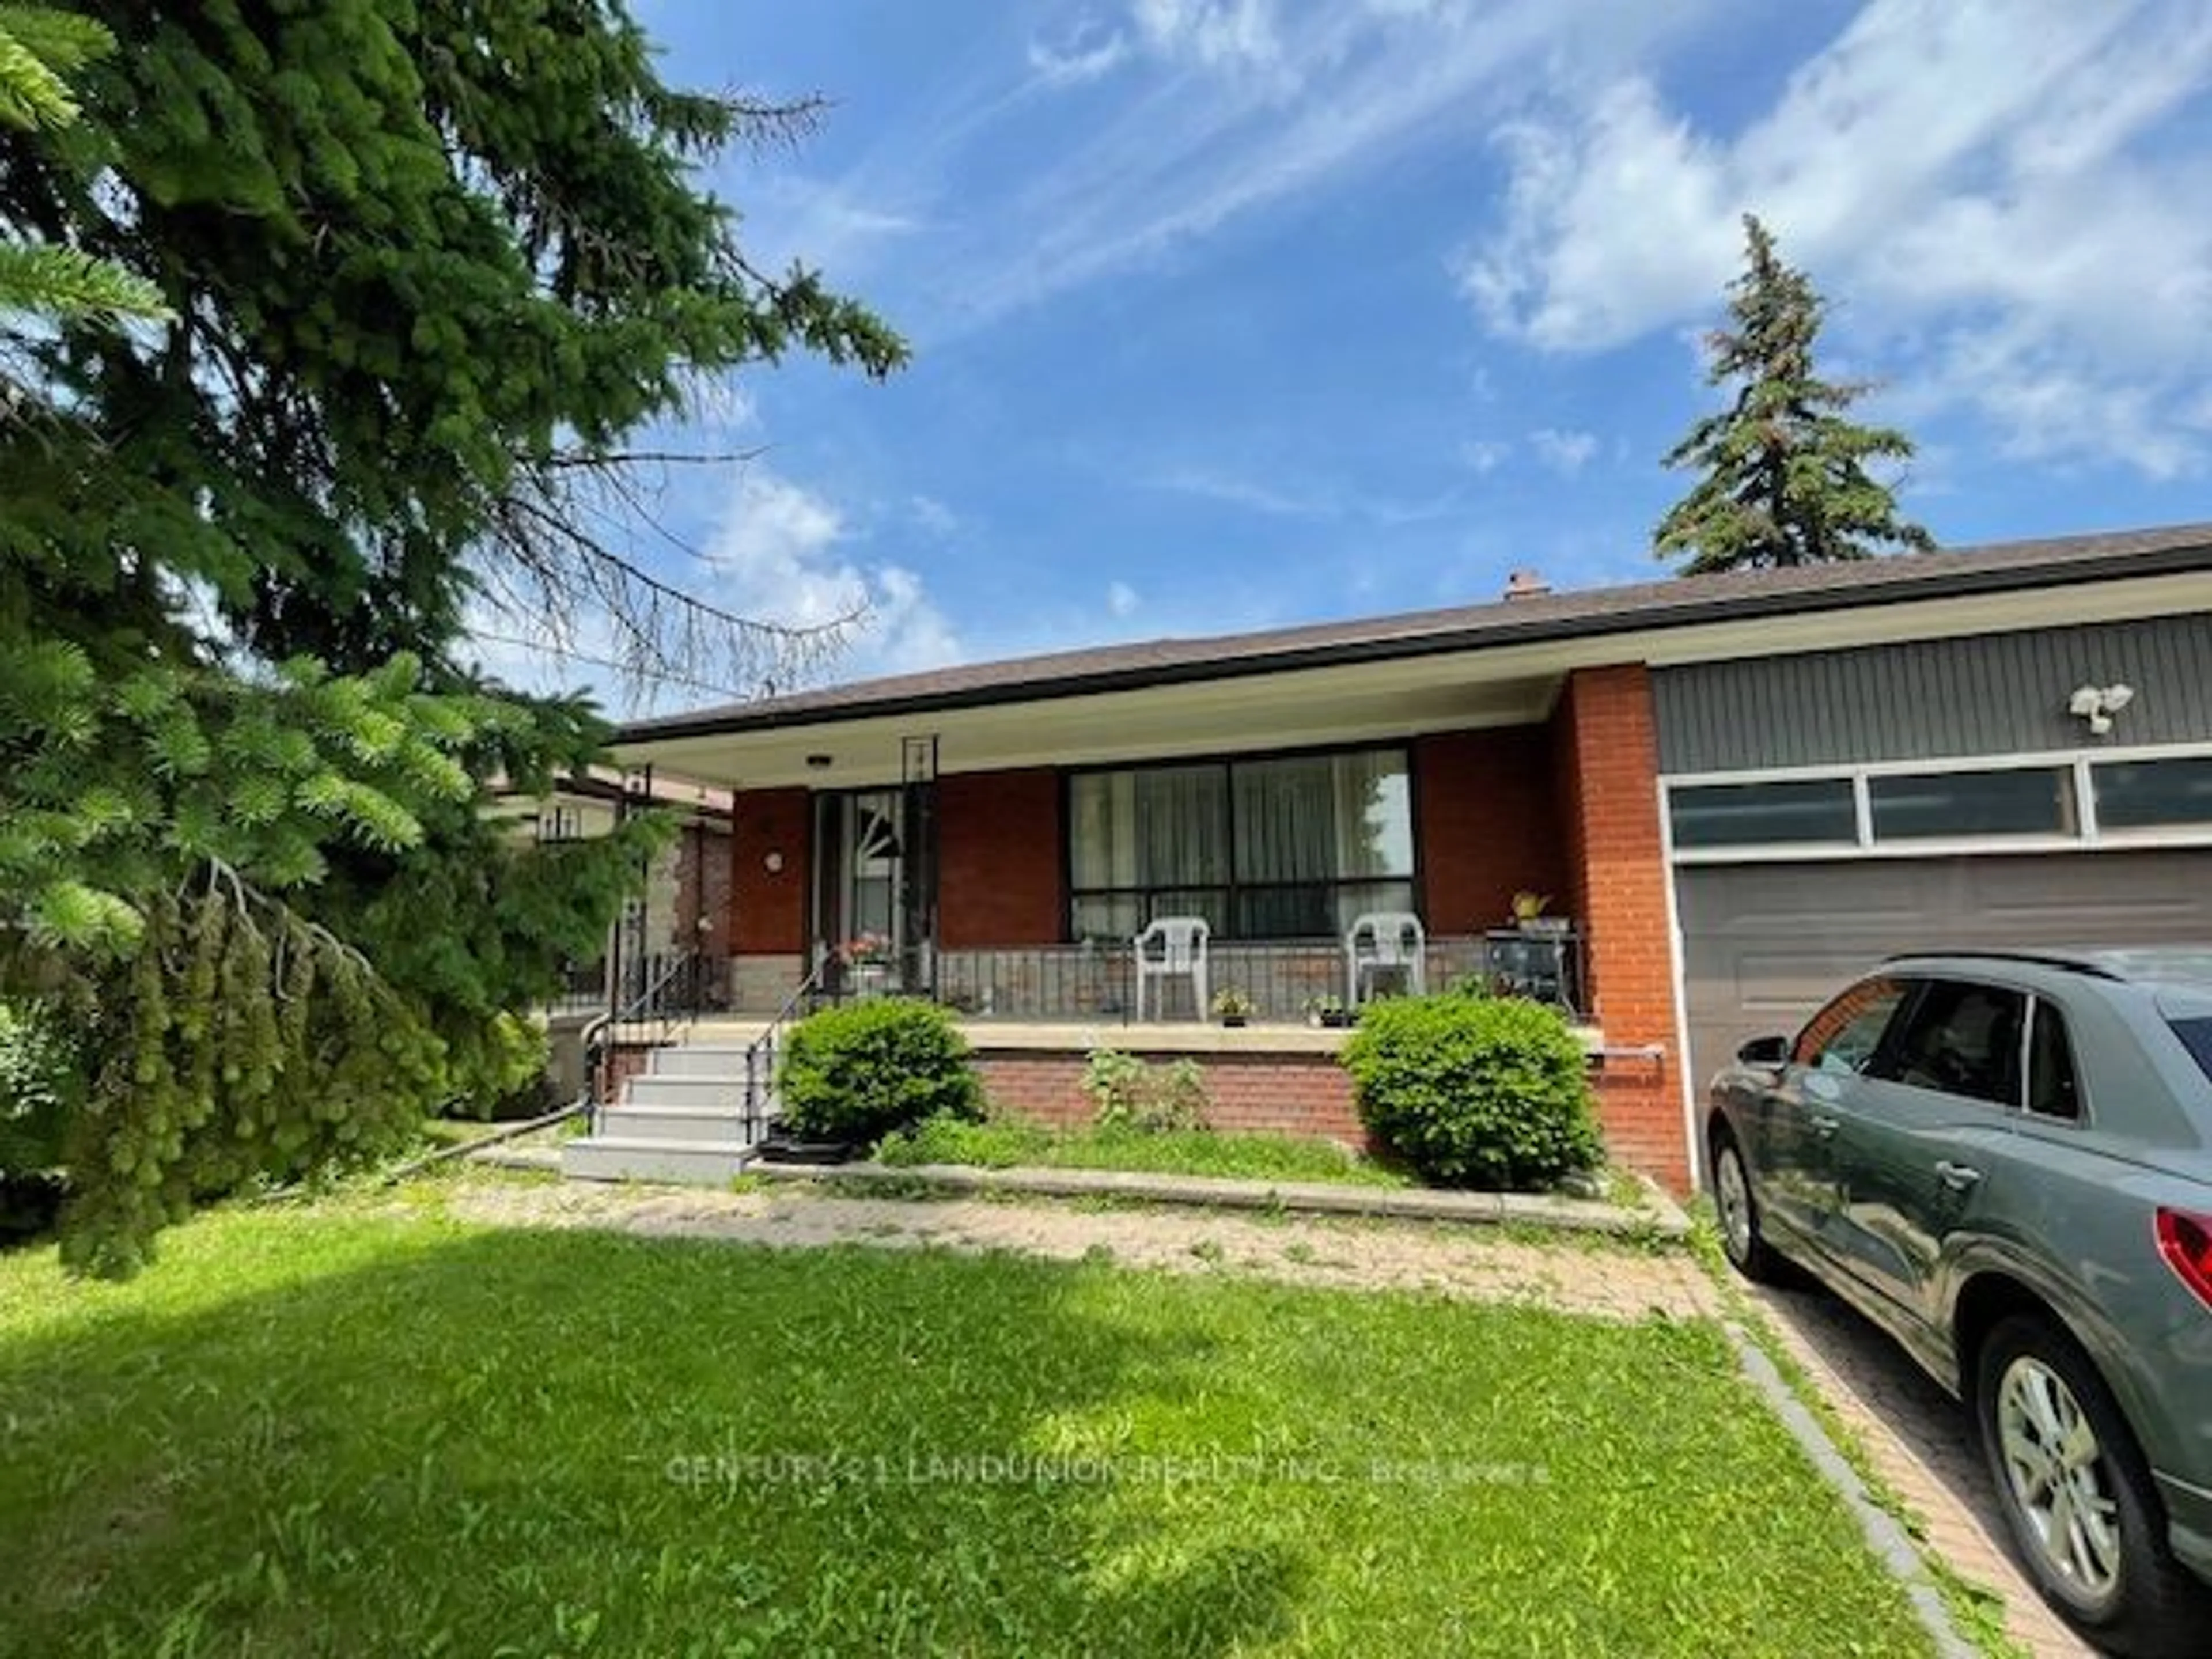 Frontside or backside of a home for 256 Drewry Ave, Toronto Ontario M2M 1E5